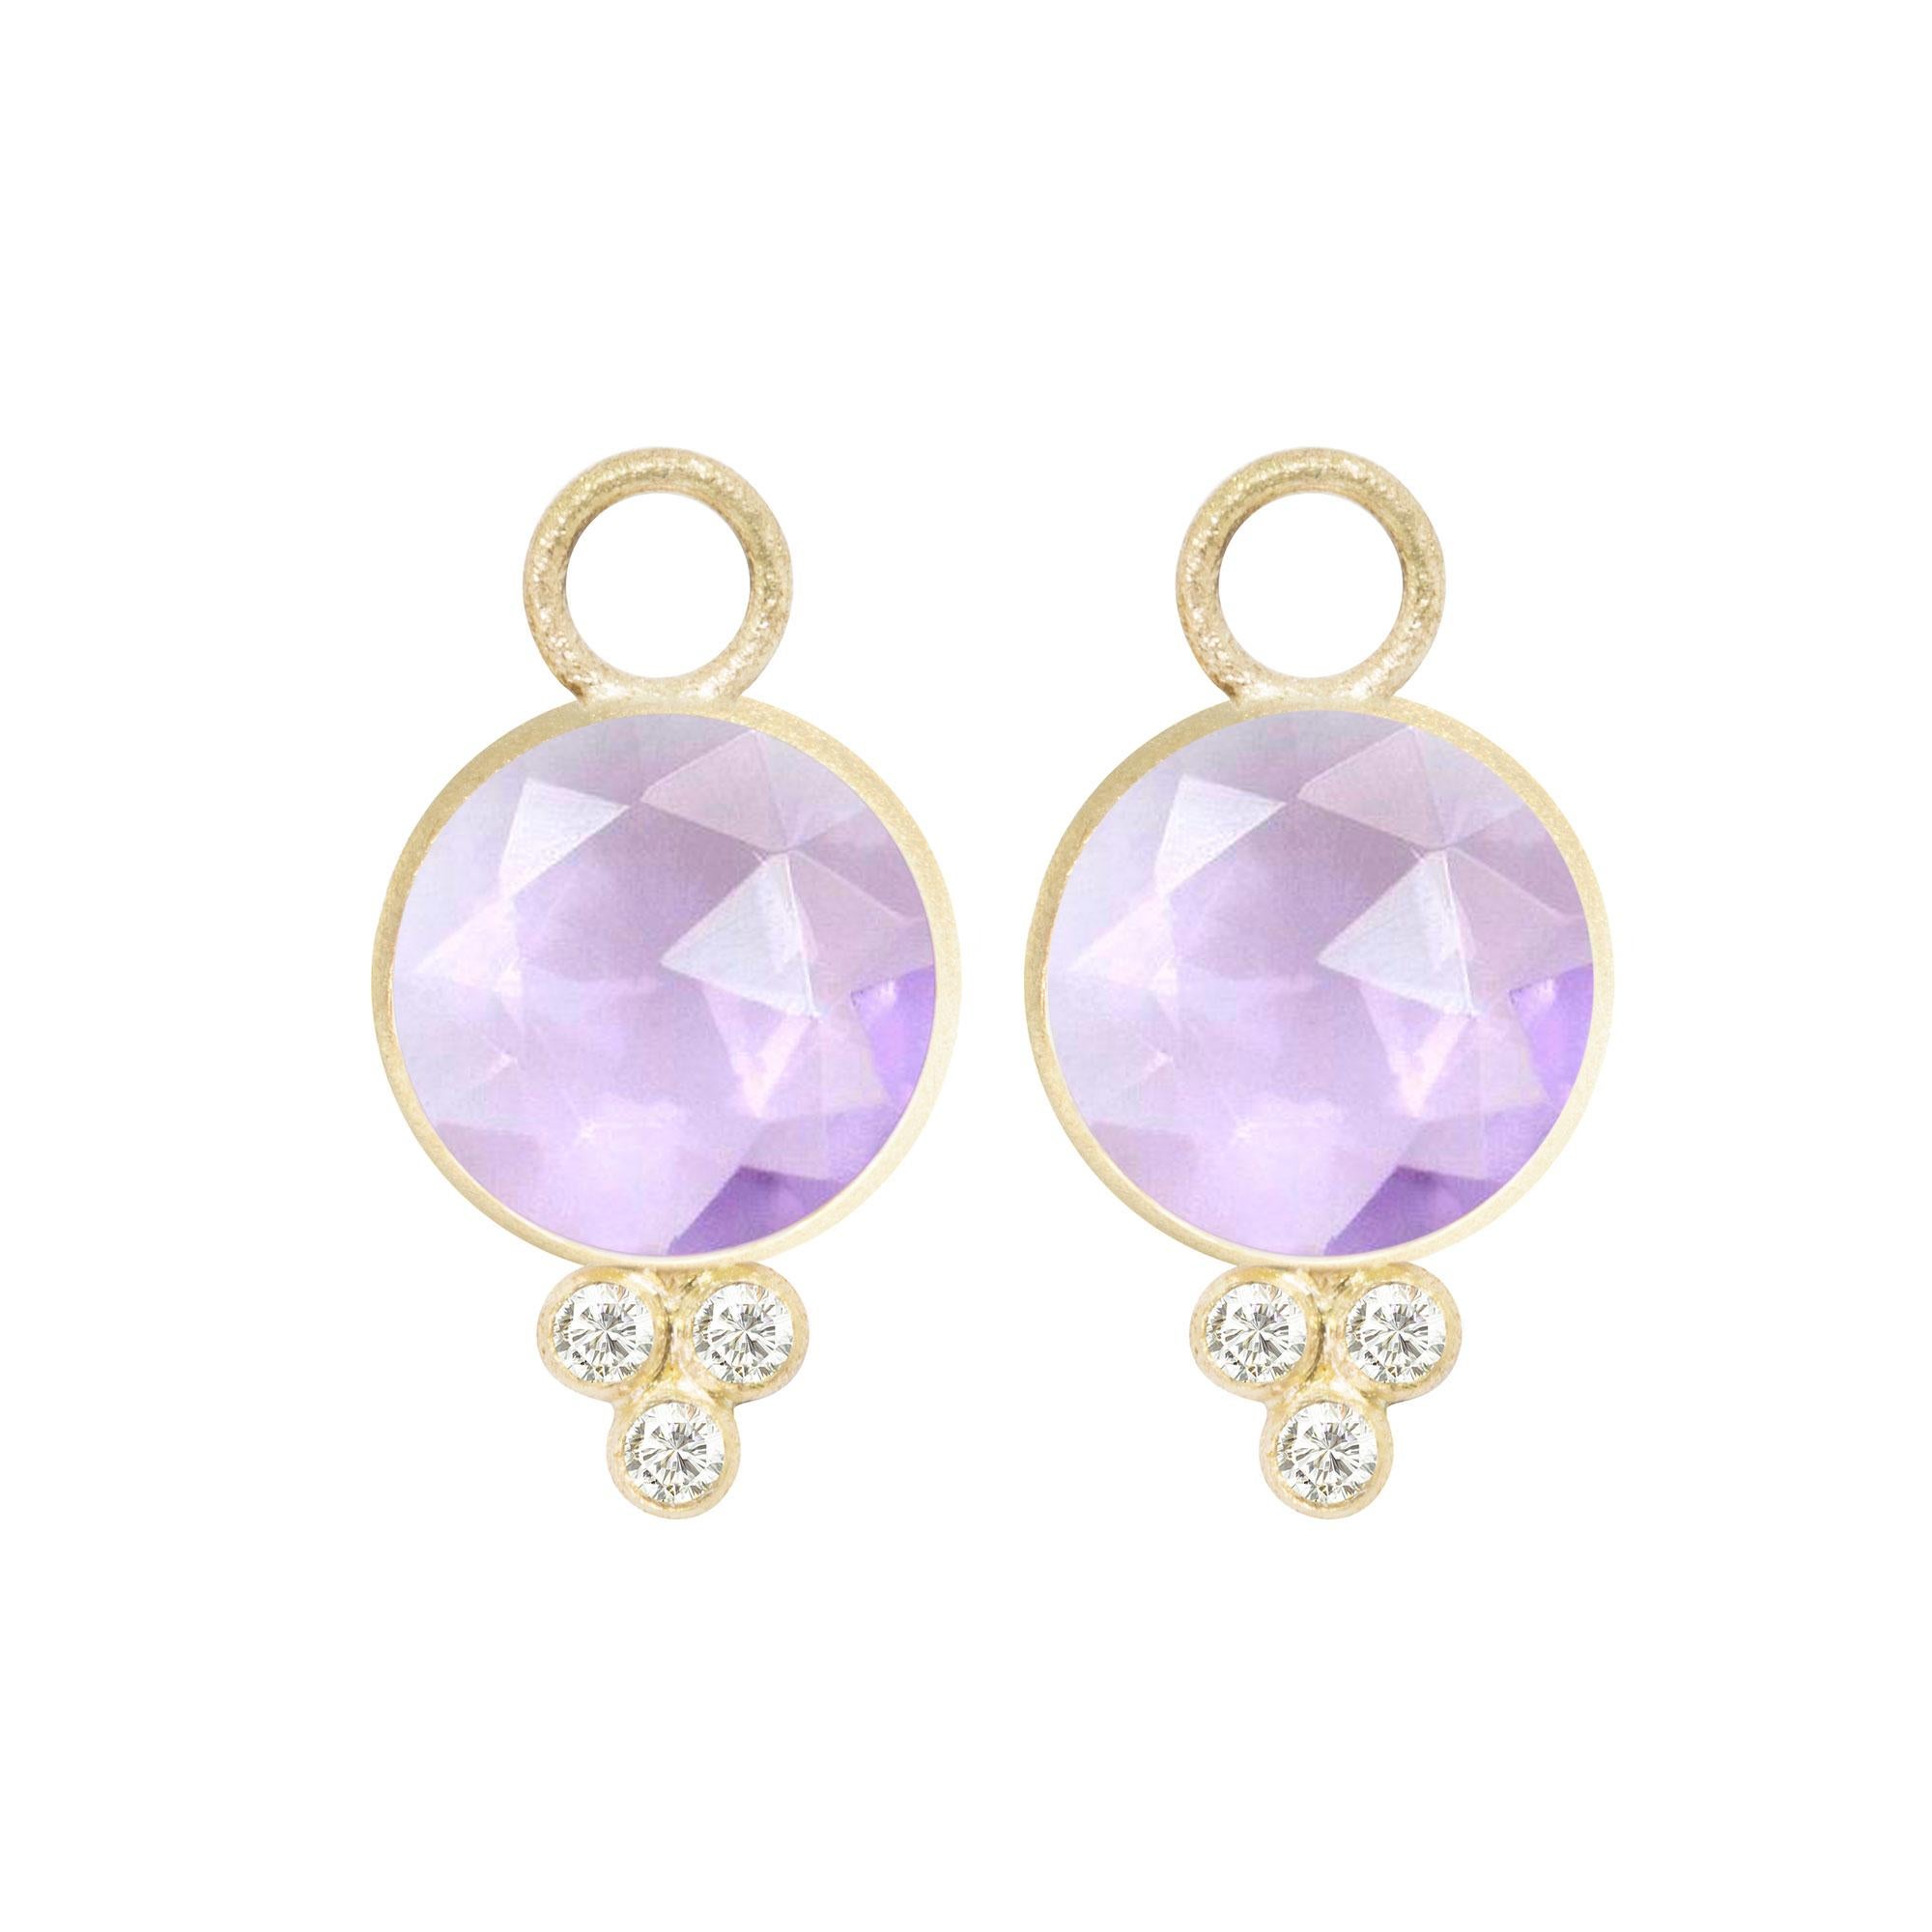 A Nina Nguyen classic to collect and treasure: Our diamond-accented Chloe Gold Charms are designed with amethyst rimmed in gold. They pair with any of our hoops and mix well with other styles.
Nina Nguyen Design's patent-pending earrings have an